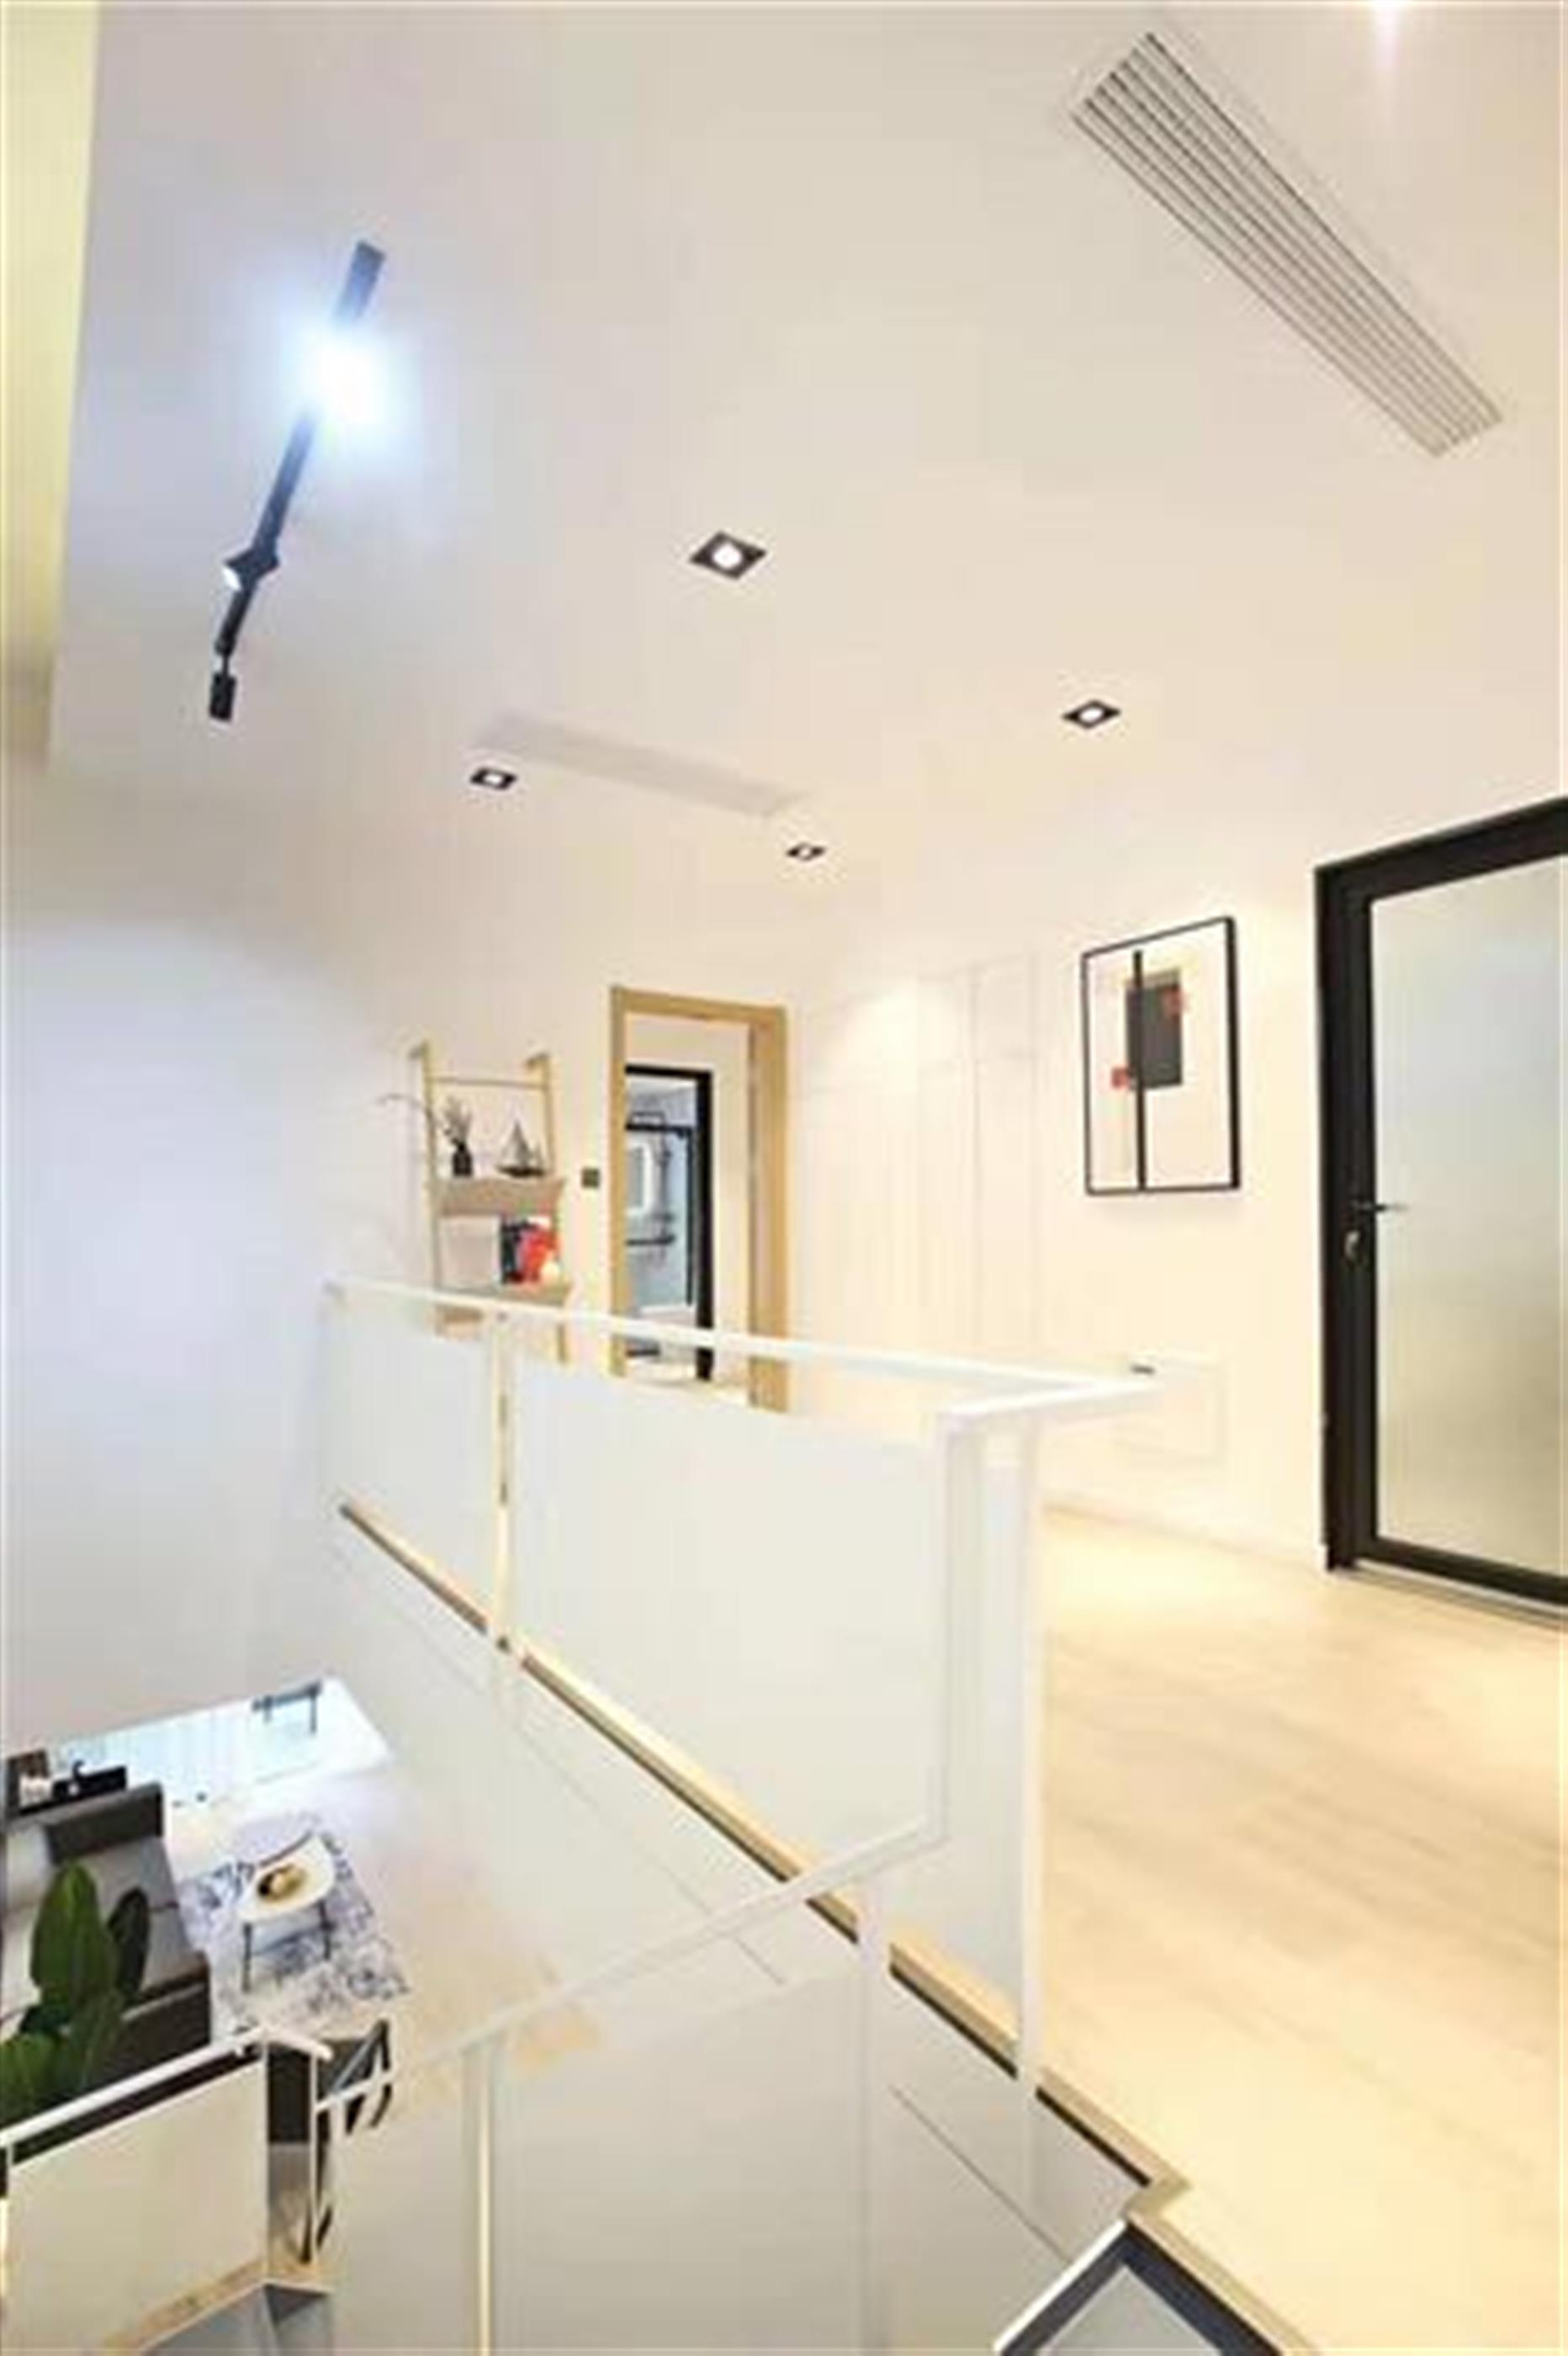 upstairs Newly-decorated Modern Bright Spacious 4BR Xintiandi Duplex for Rent in Shanghai LN 10/13